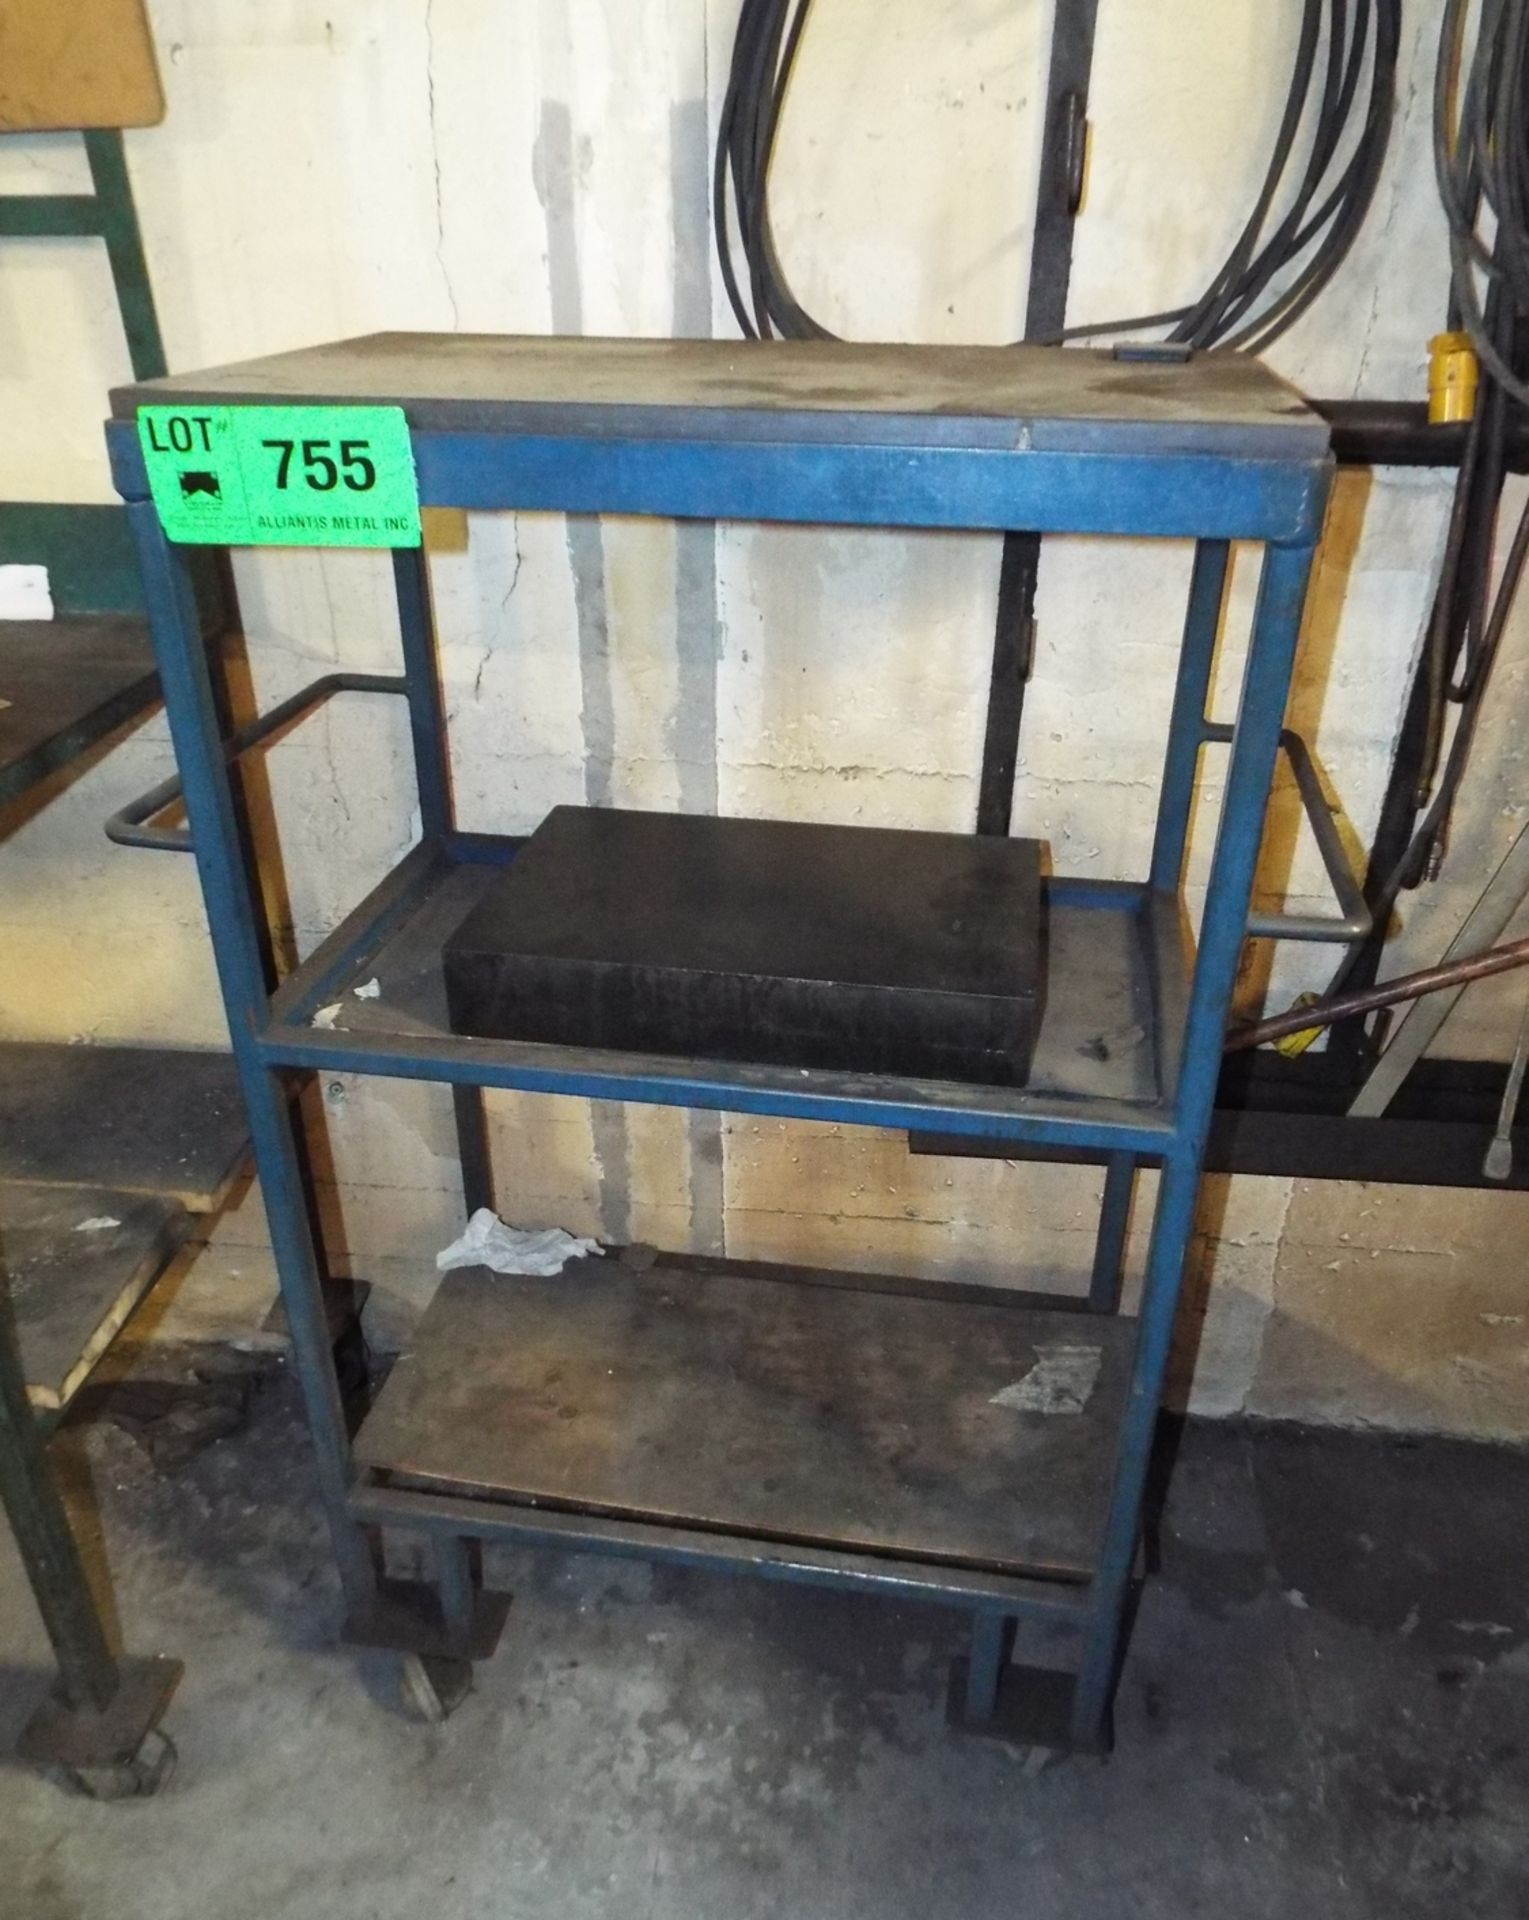 LOT/ STEEL CART WITH GRANITE SURFACE PLATES